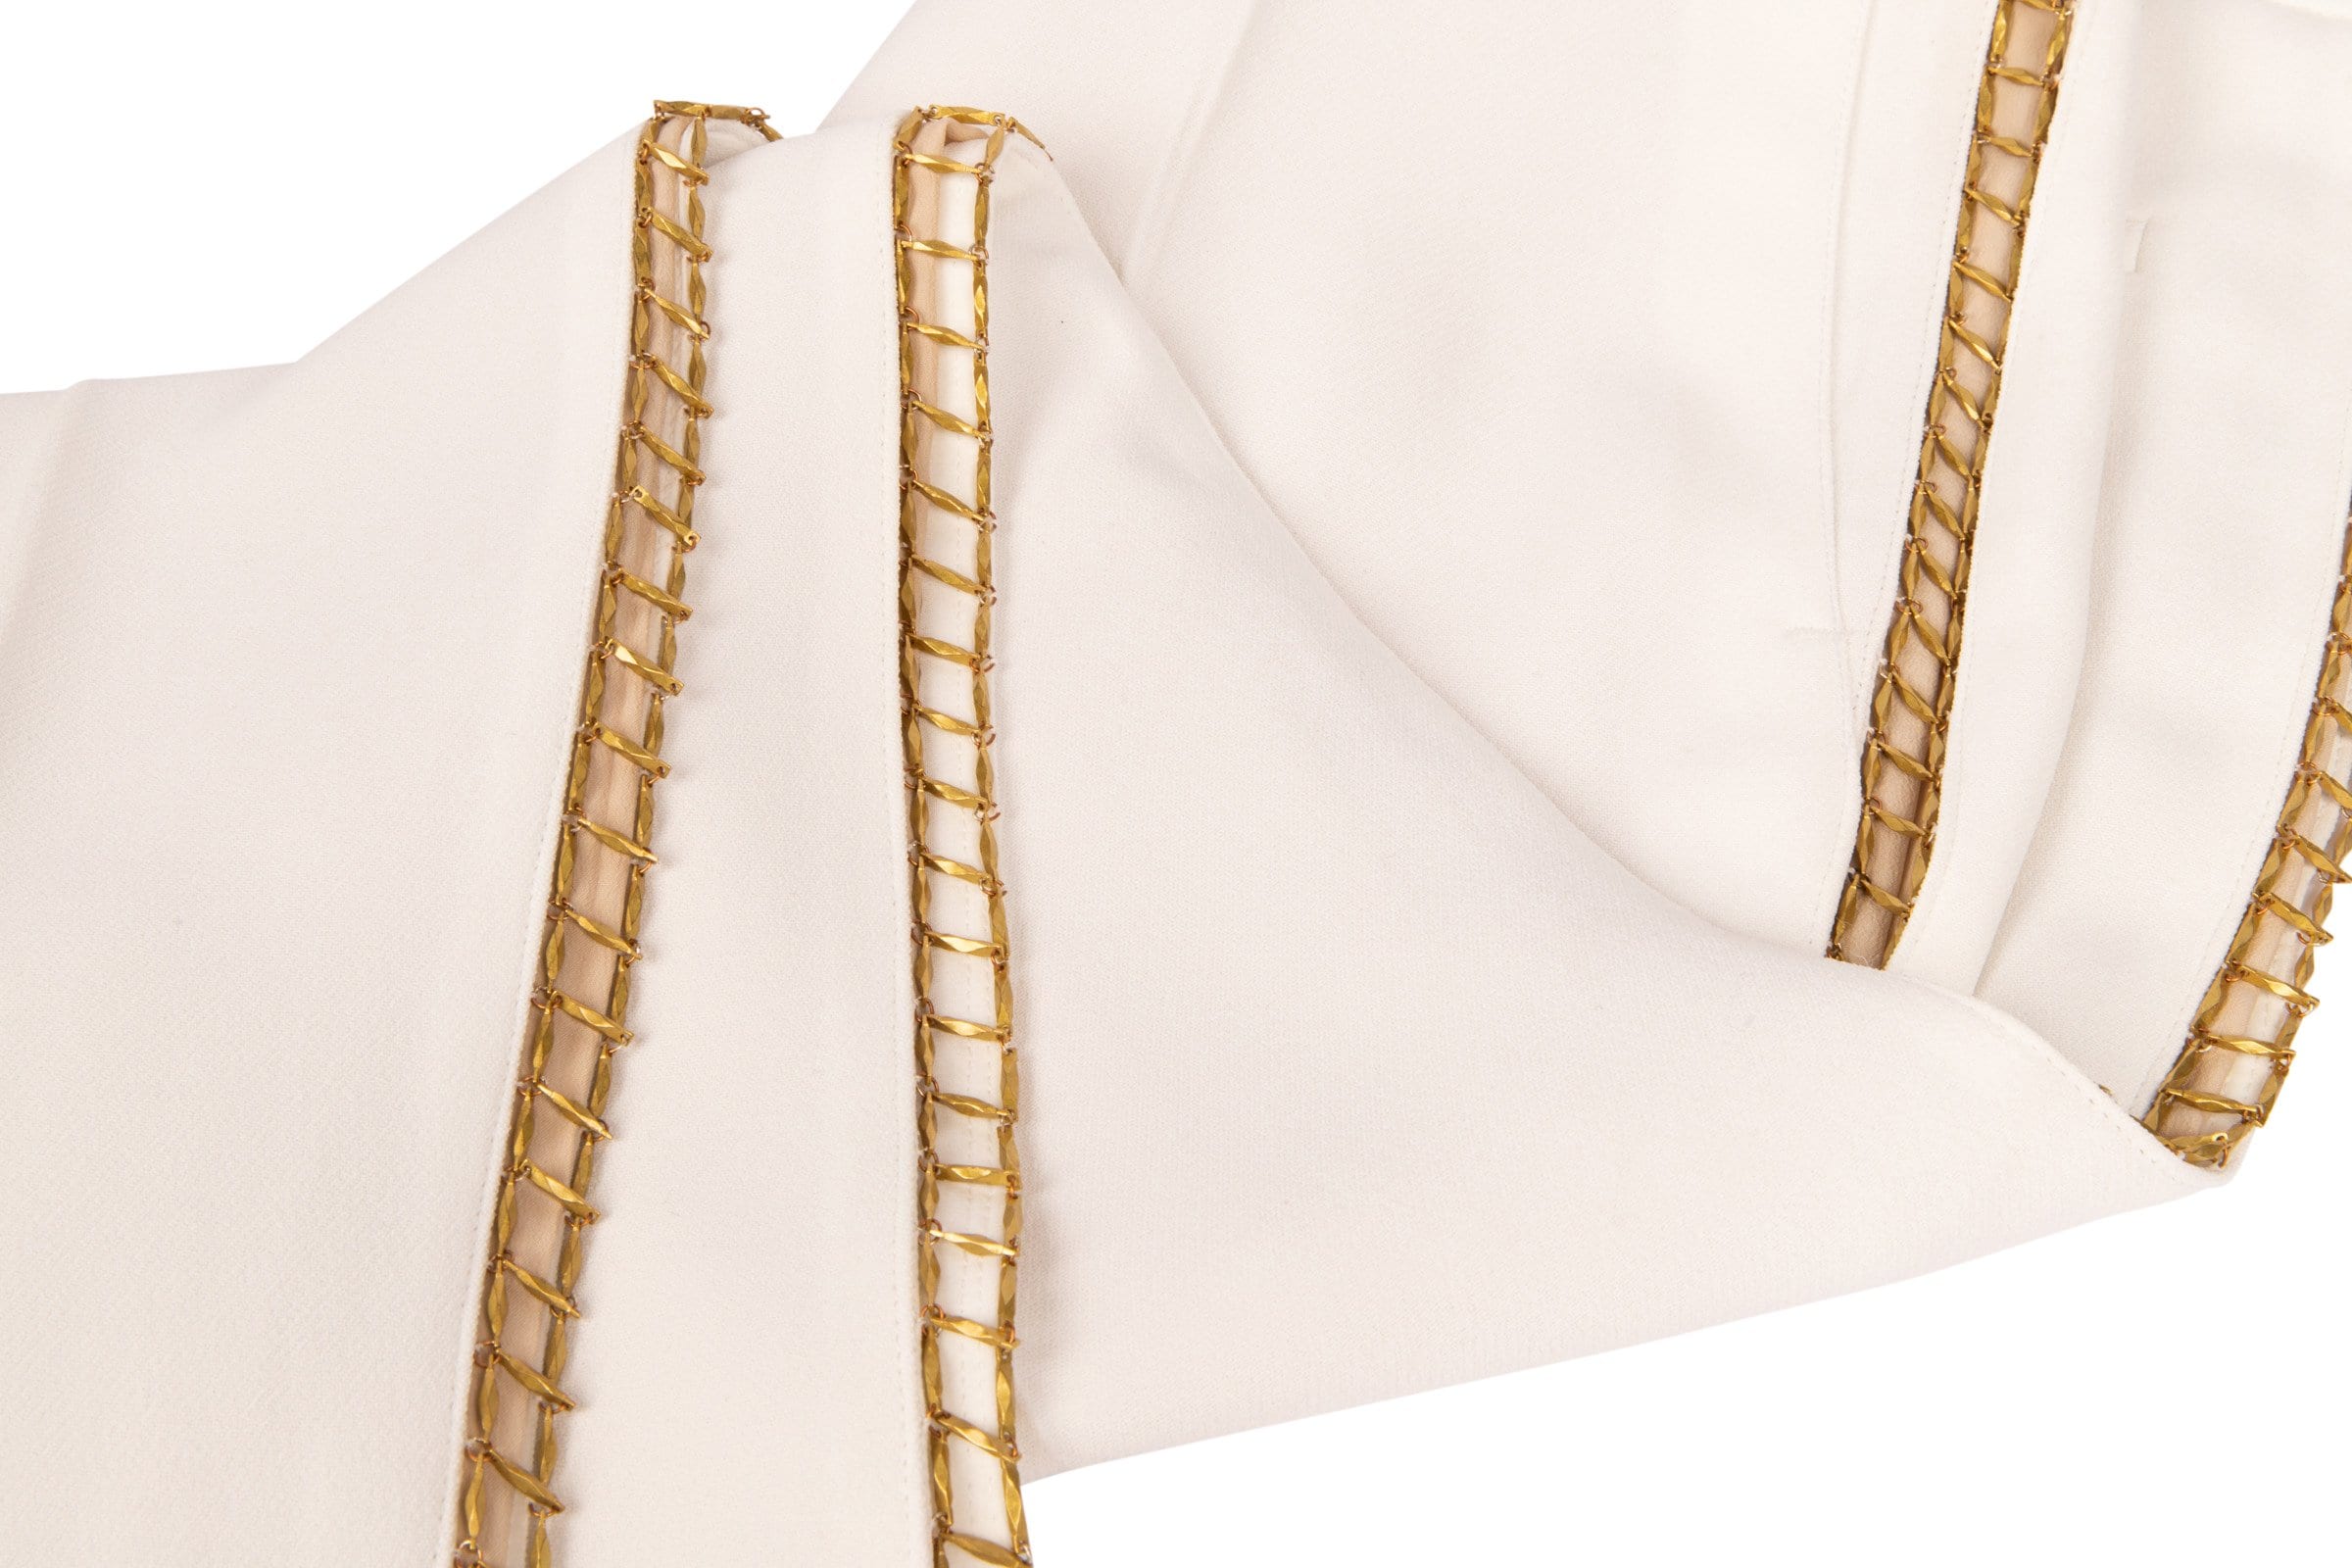 Chloe Pant Winter White w/ Open Gold Metal Detail 36 / 4 - mightychic